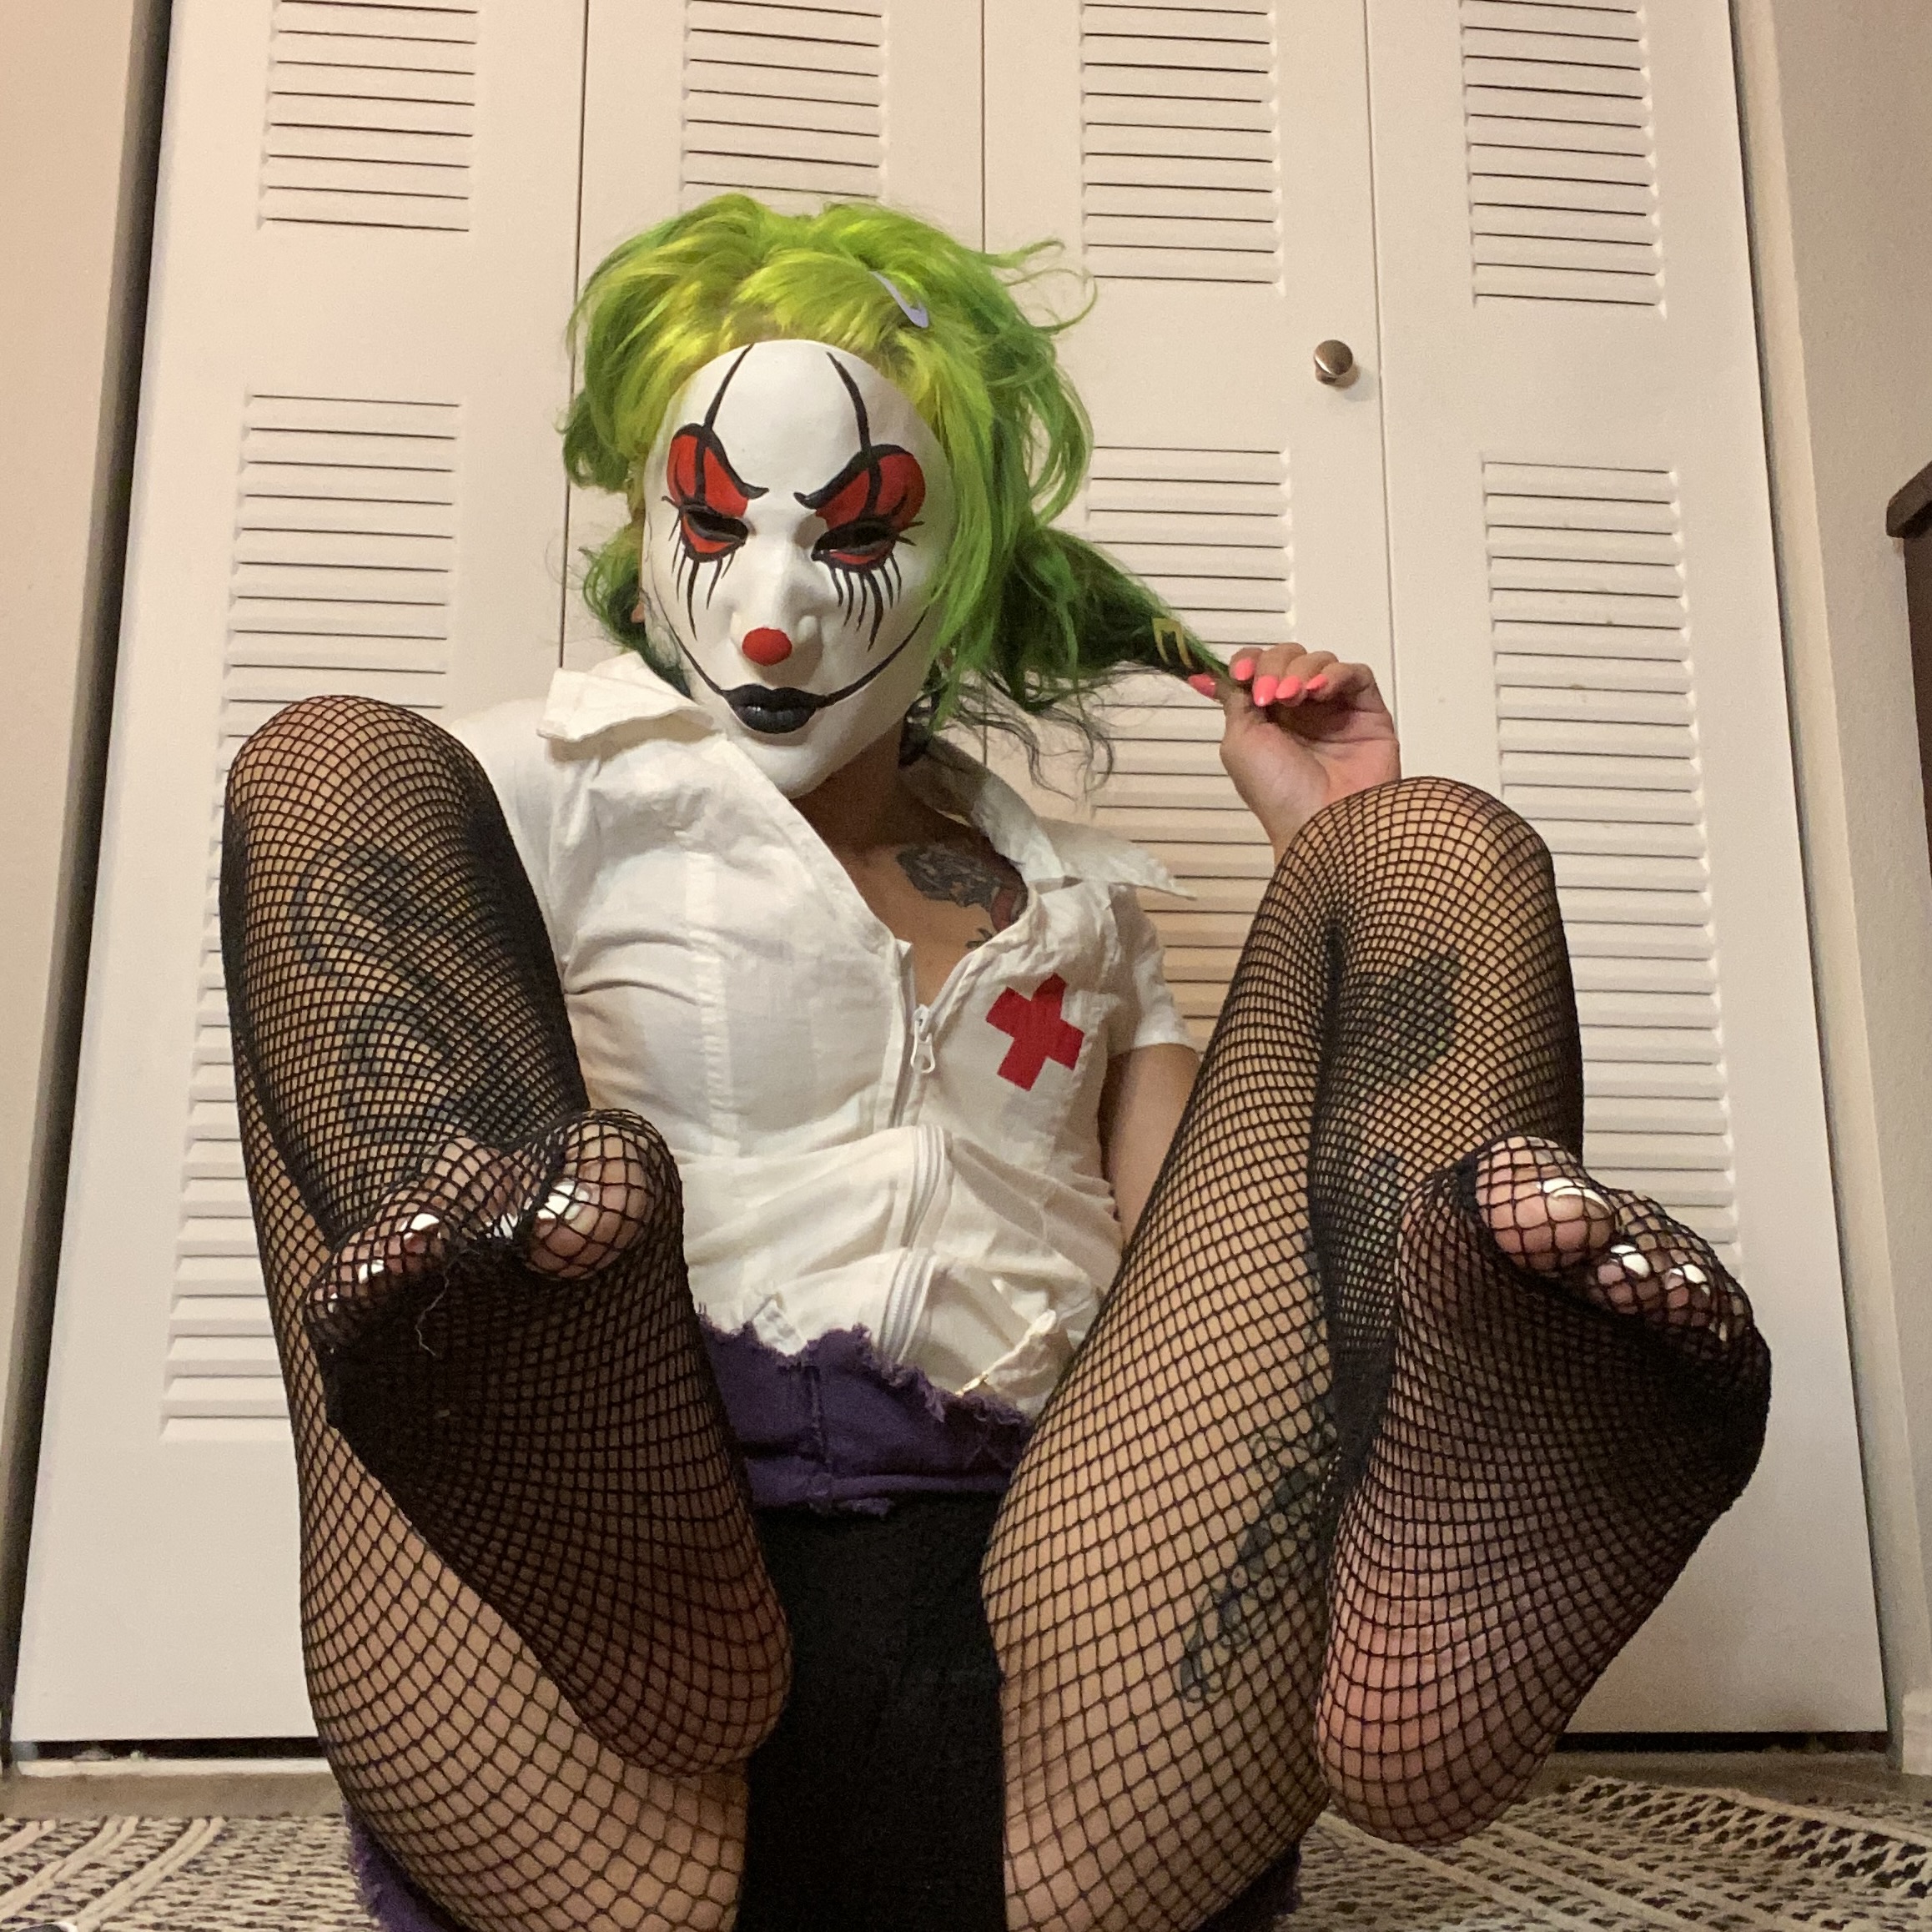 Sexy Naked Clowns - Clown Videos, Photos And Other Content and Other Amateur Porn Content on ELM